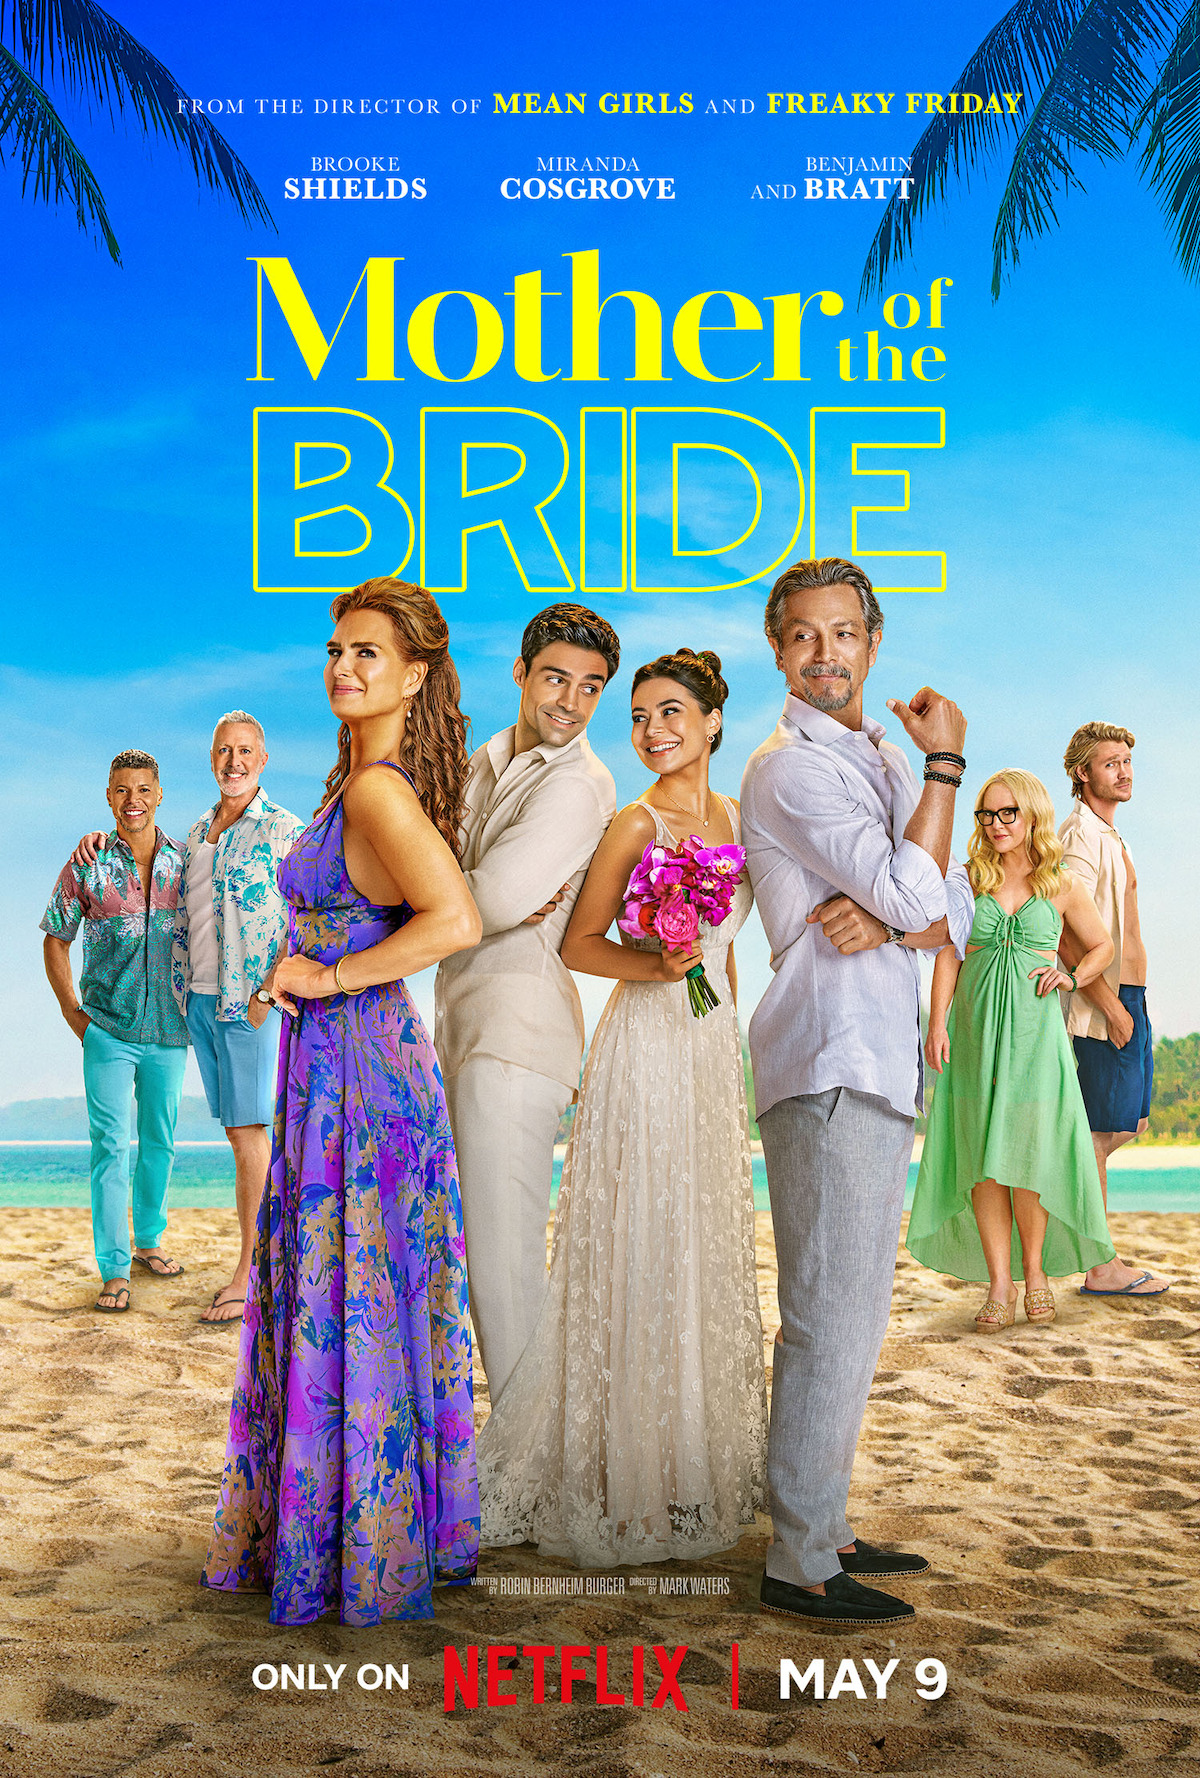 ‘Mother of the Bride’ key art